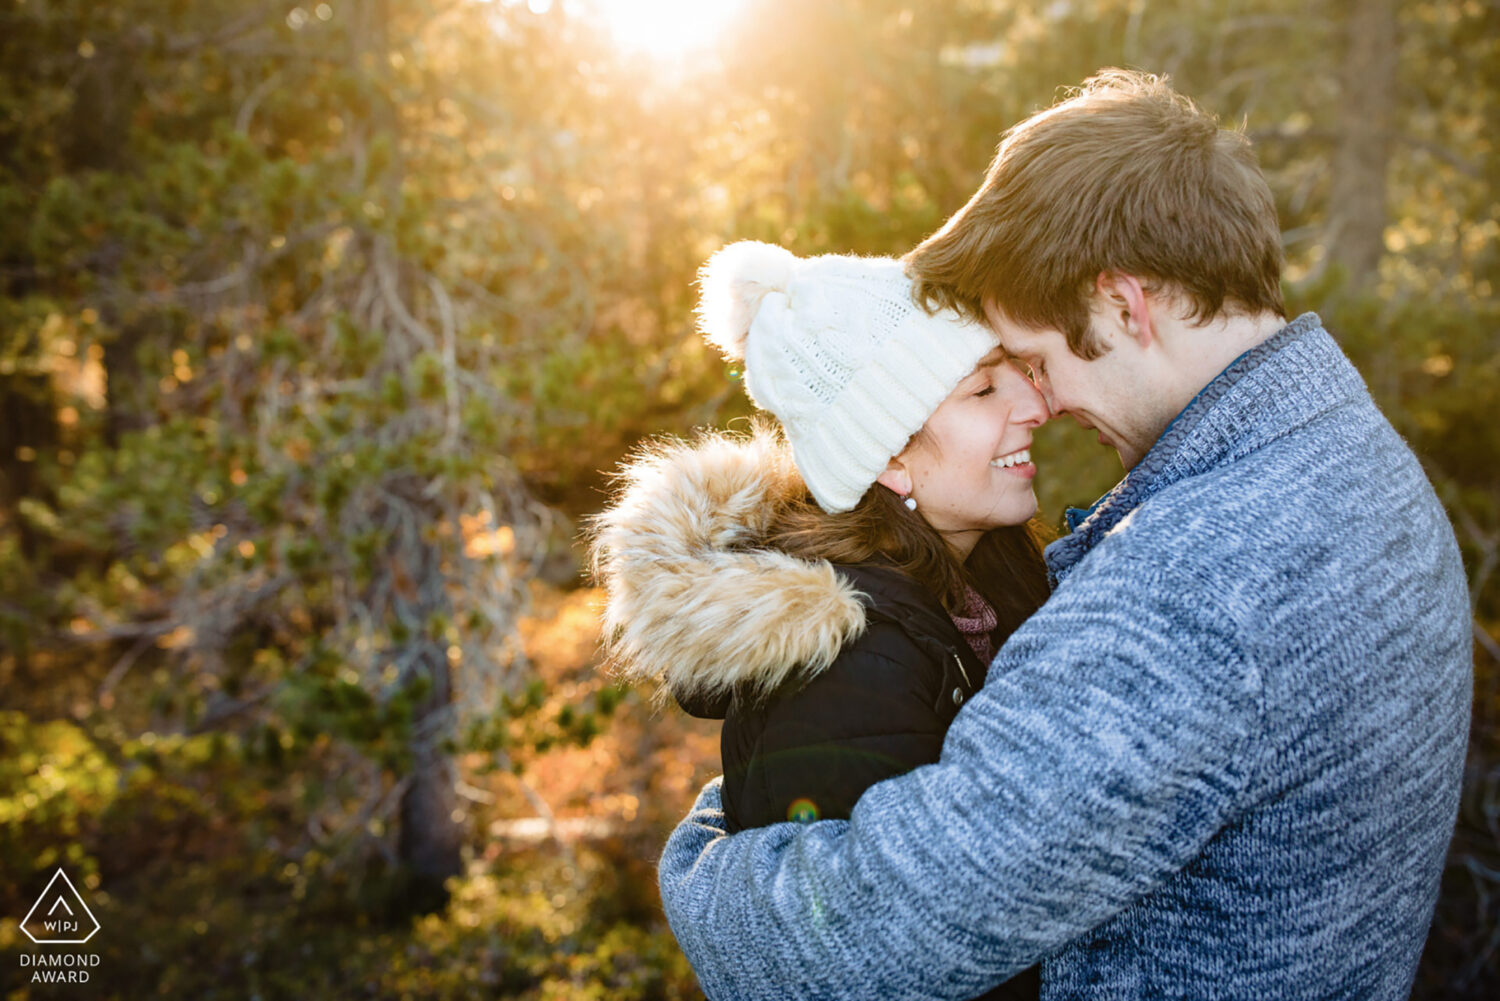 A couple shares a special moment during Golden Hour at their Truckee engagement photoshoot.